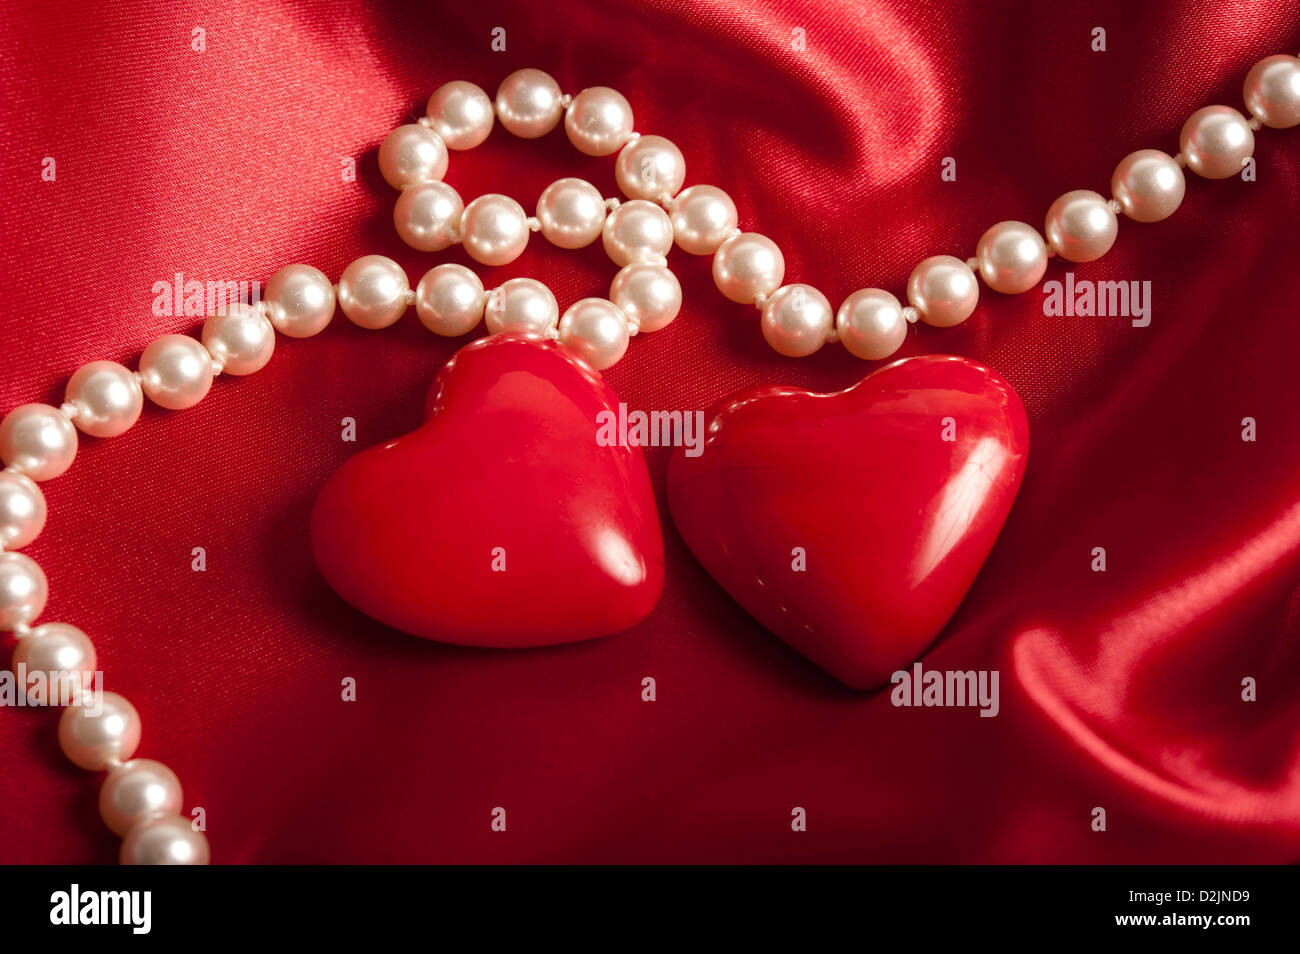 pearls necklace with two heart shapes, valentine concept Stock Photo